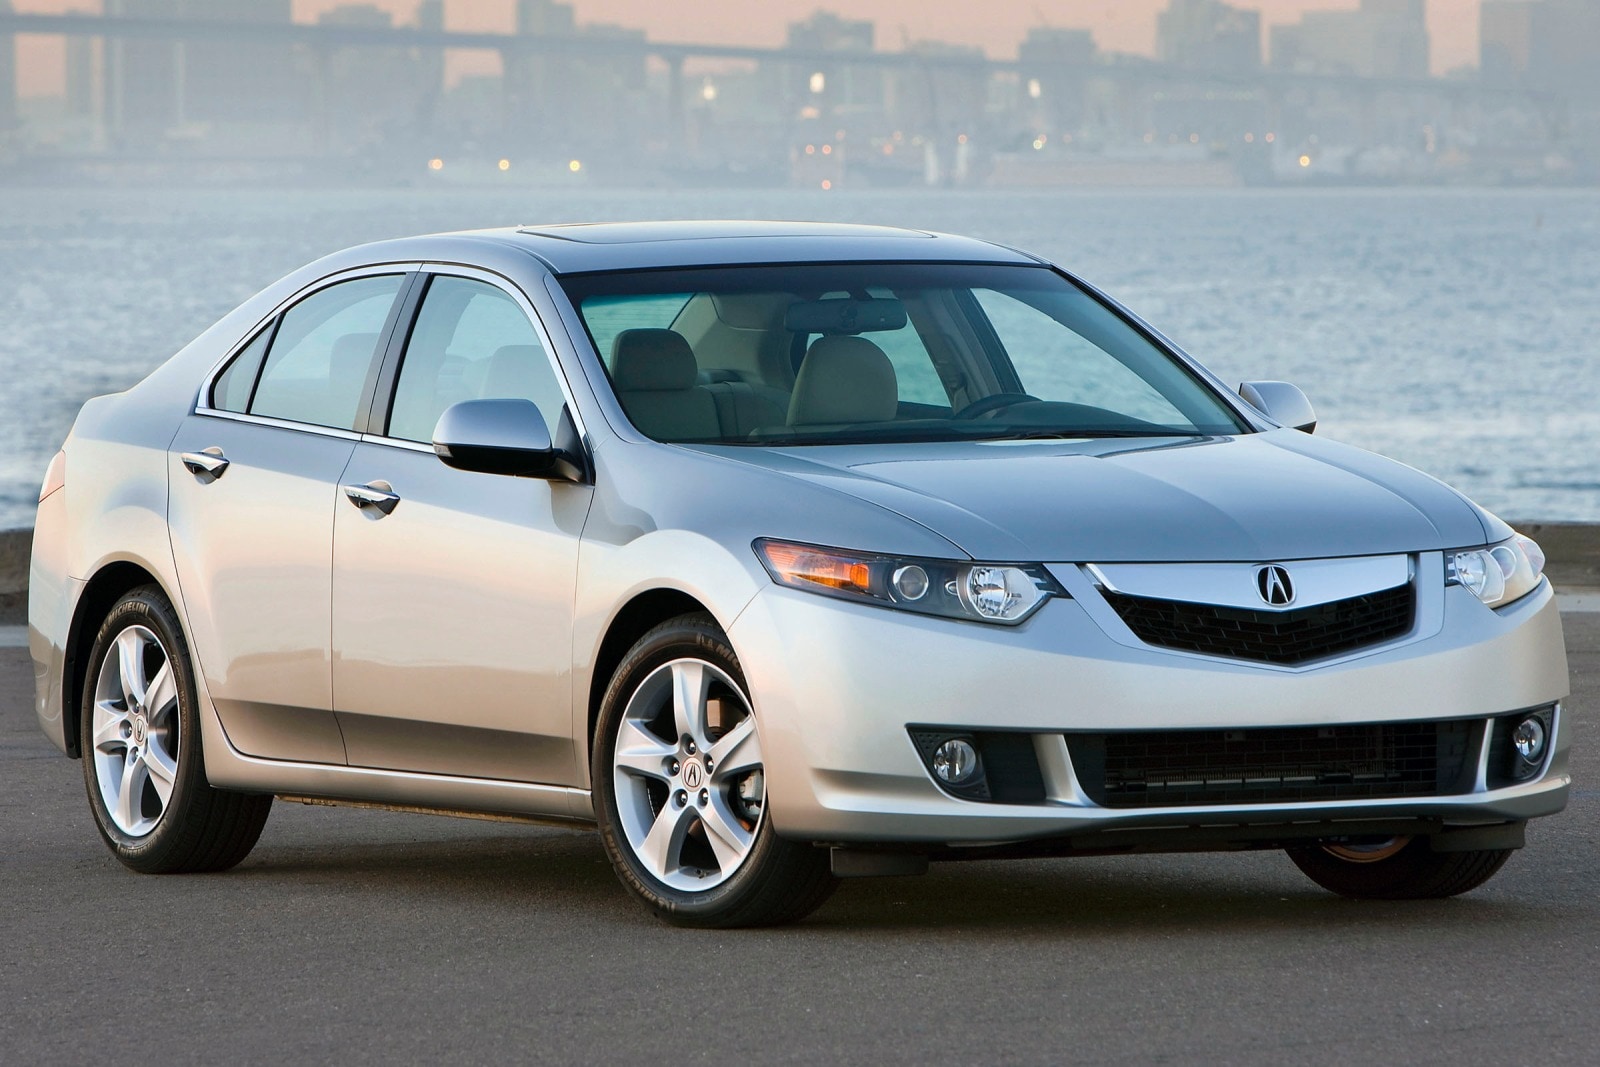 2010 Acura TSX Review & Ratings | Edmunds